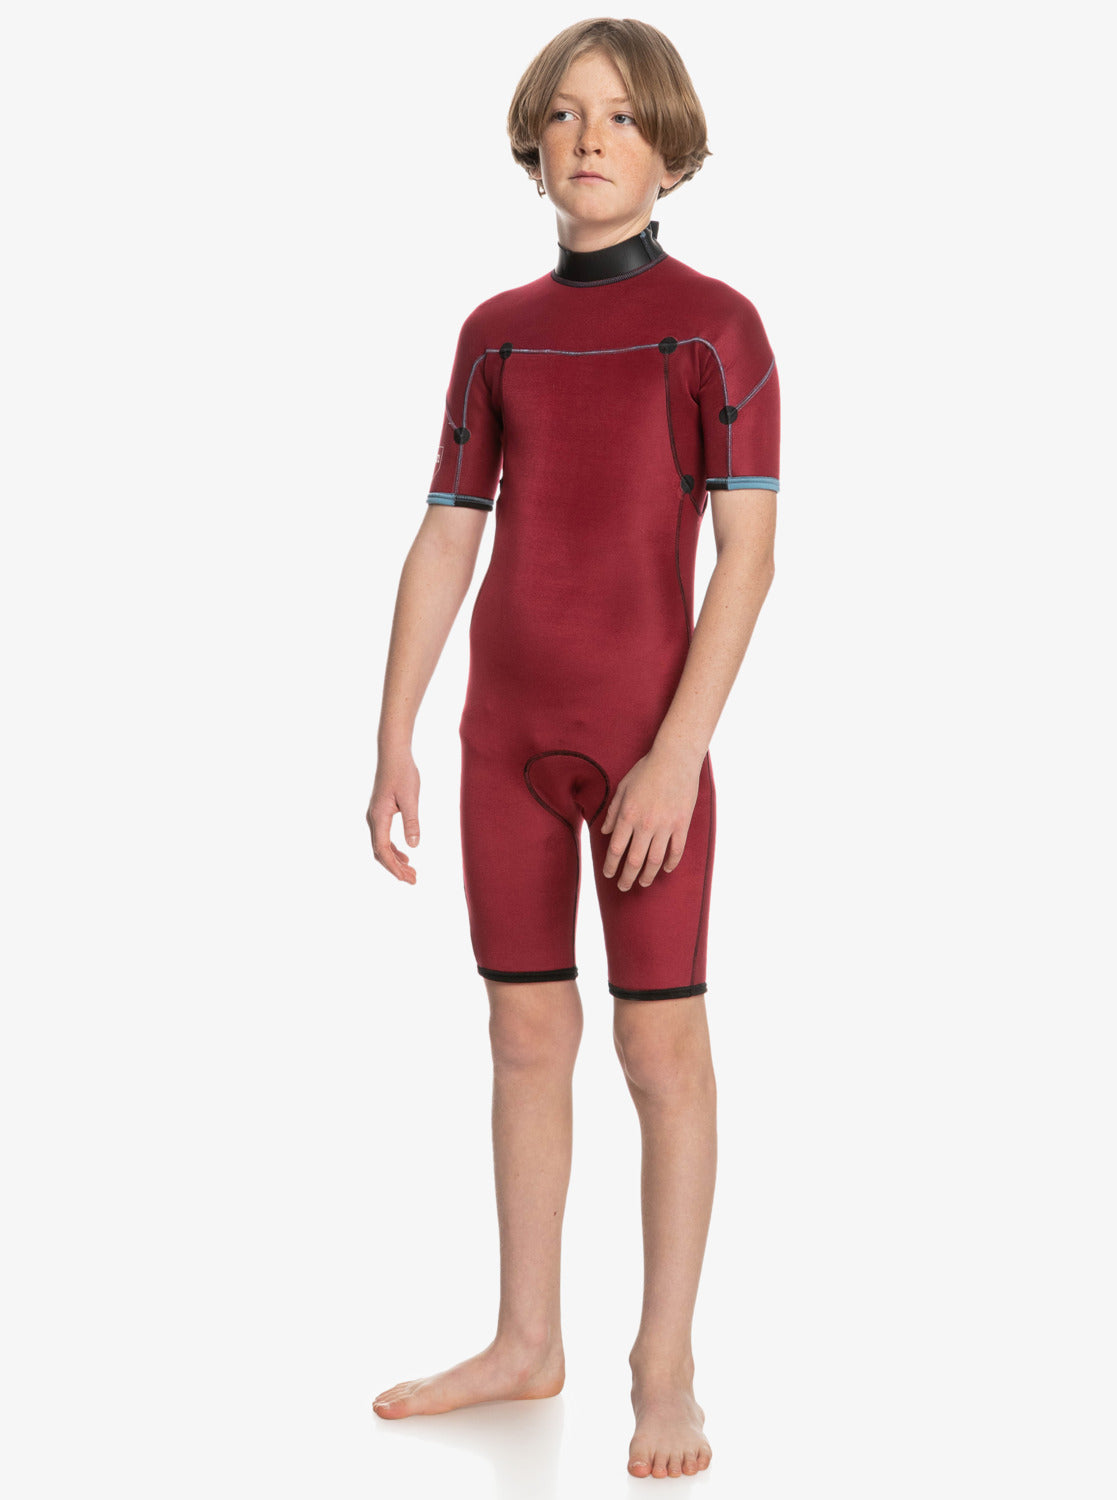 Quiksilver Boys 8-16 Everyday Sessions 2/2 Back-Zip Springsuit